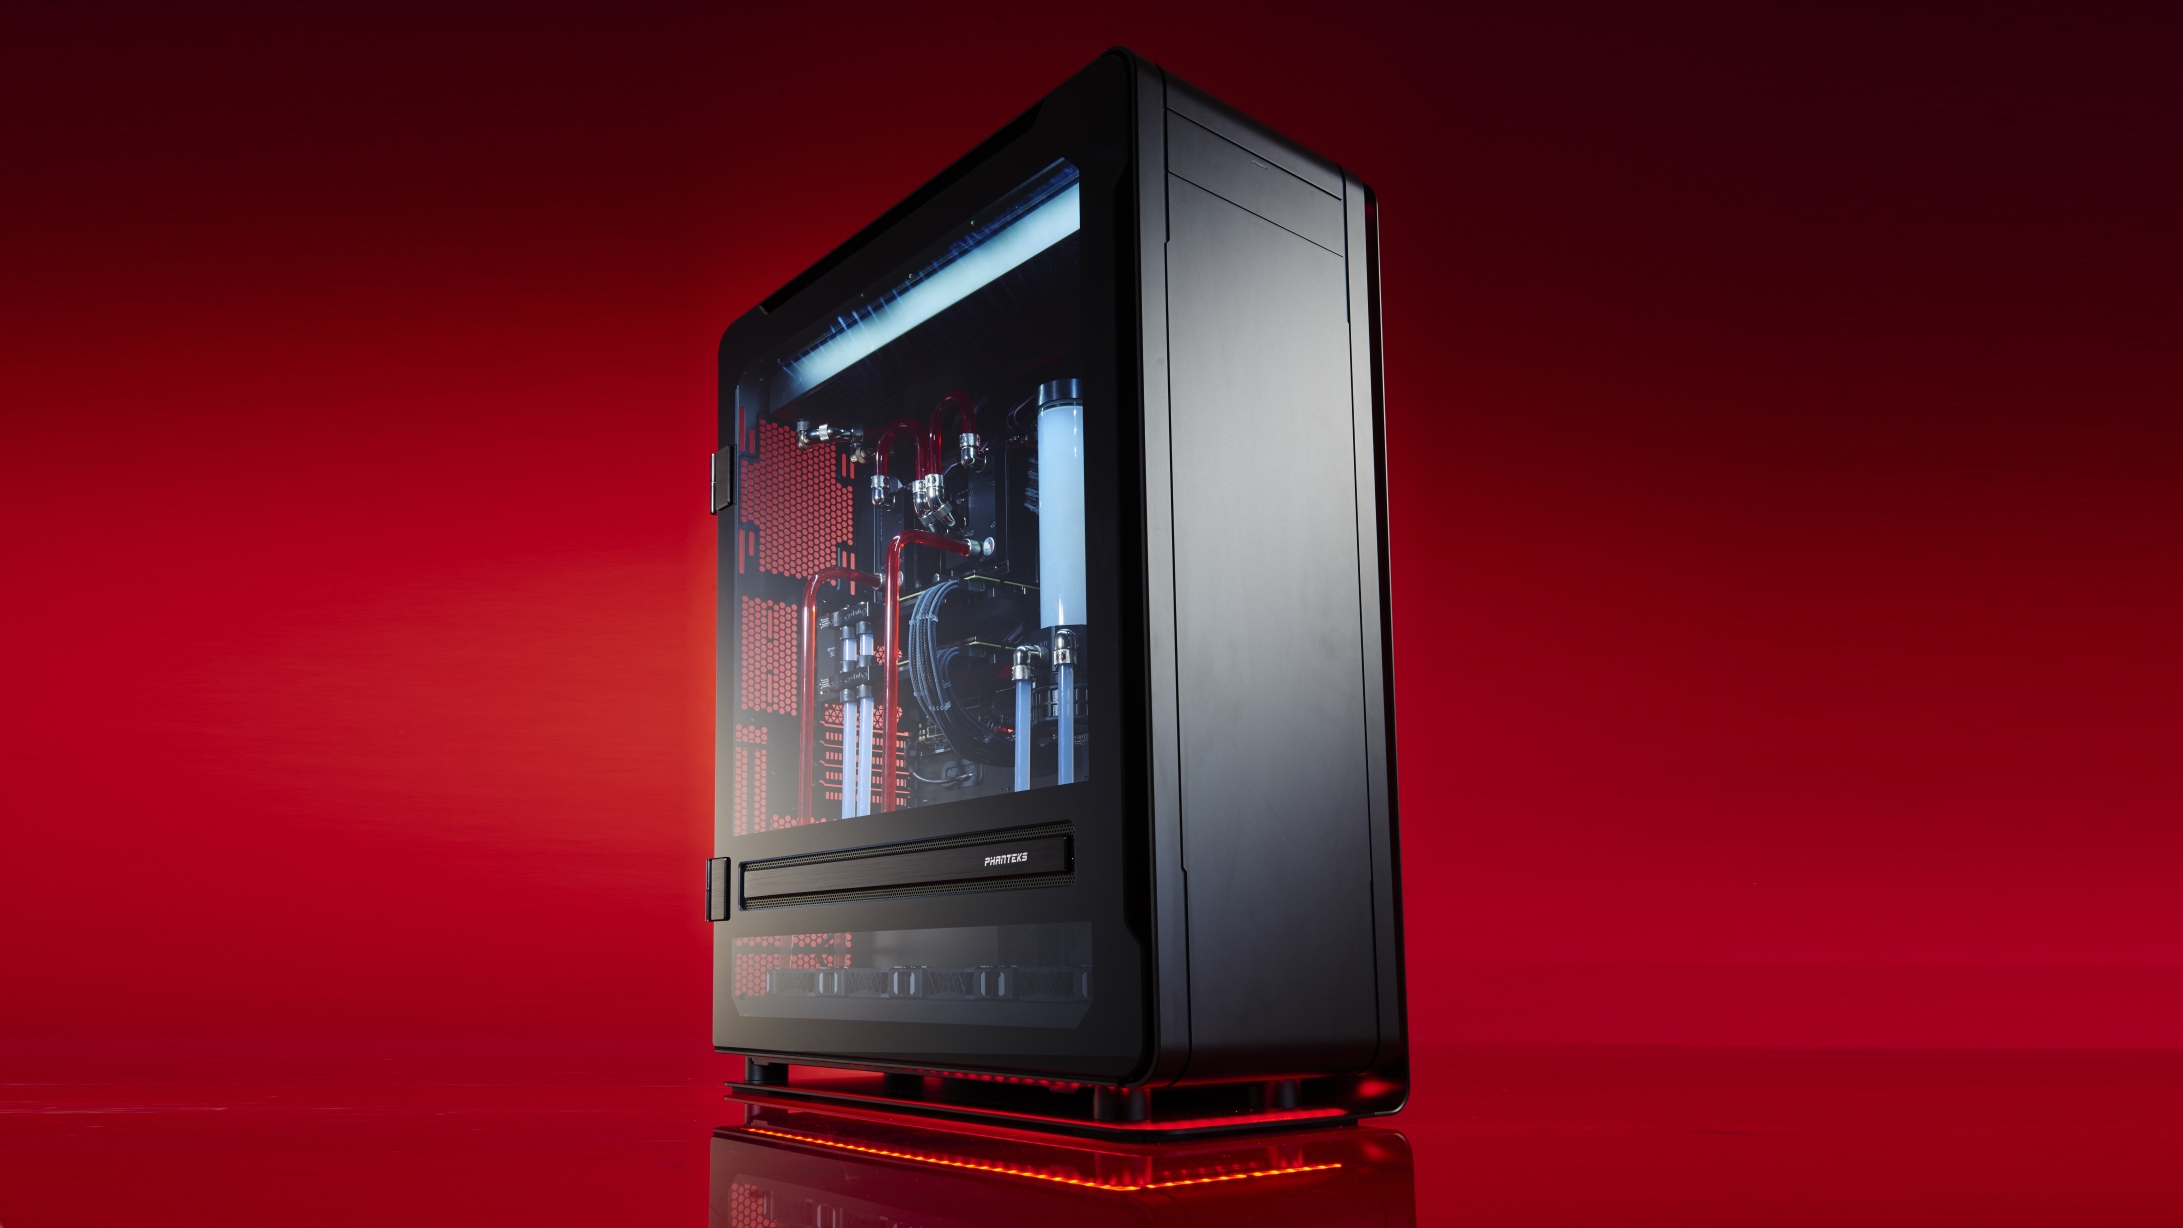 Okkernoot erven Sceptisch How to build a PC: a step-by-step guide to building the best PC | TechRadar